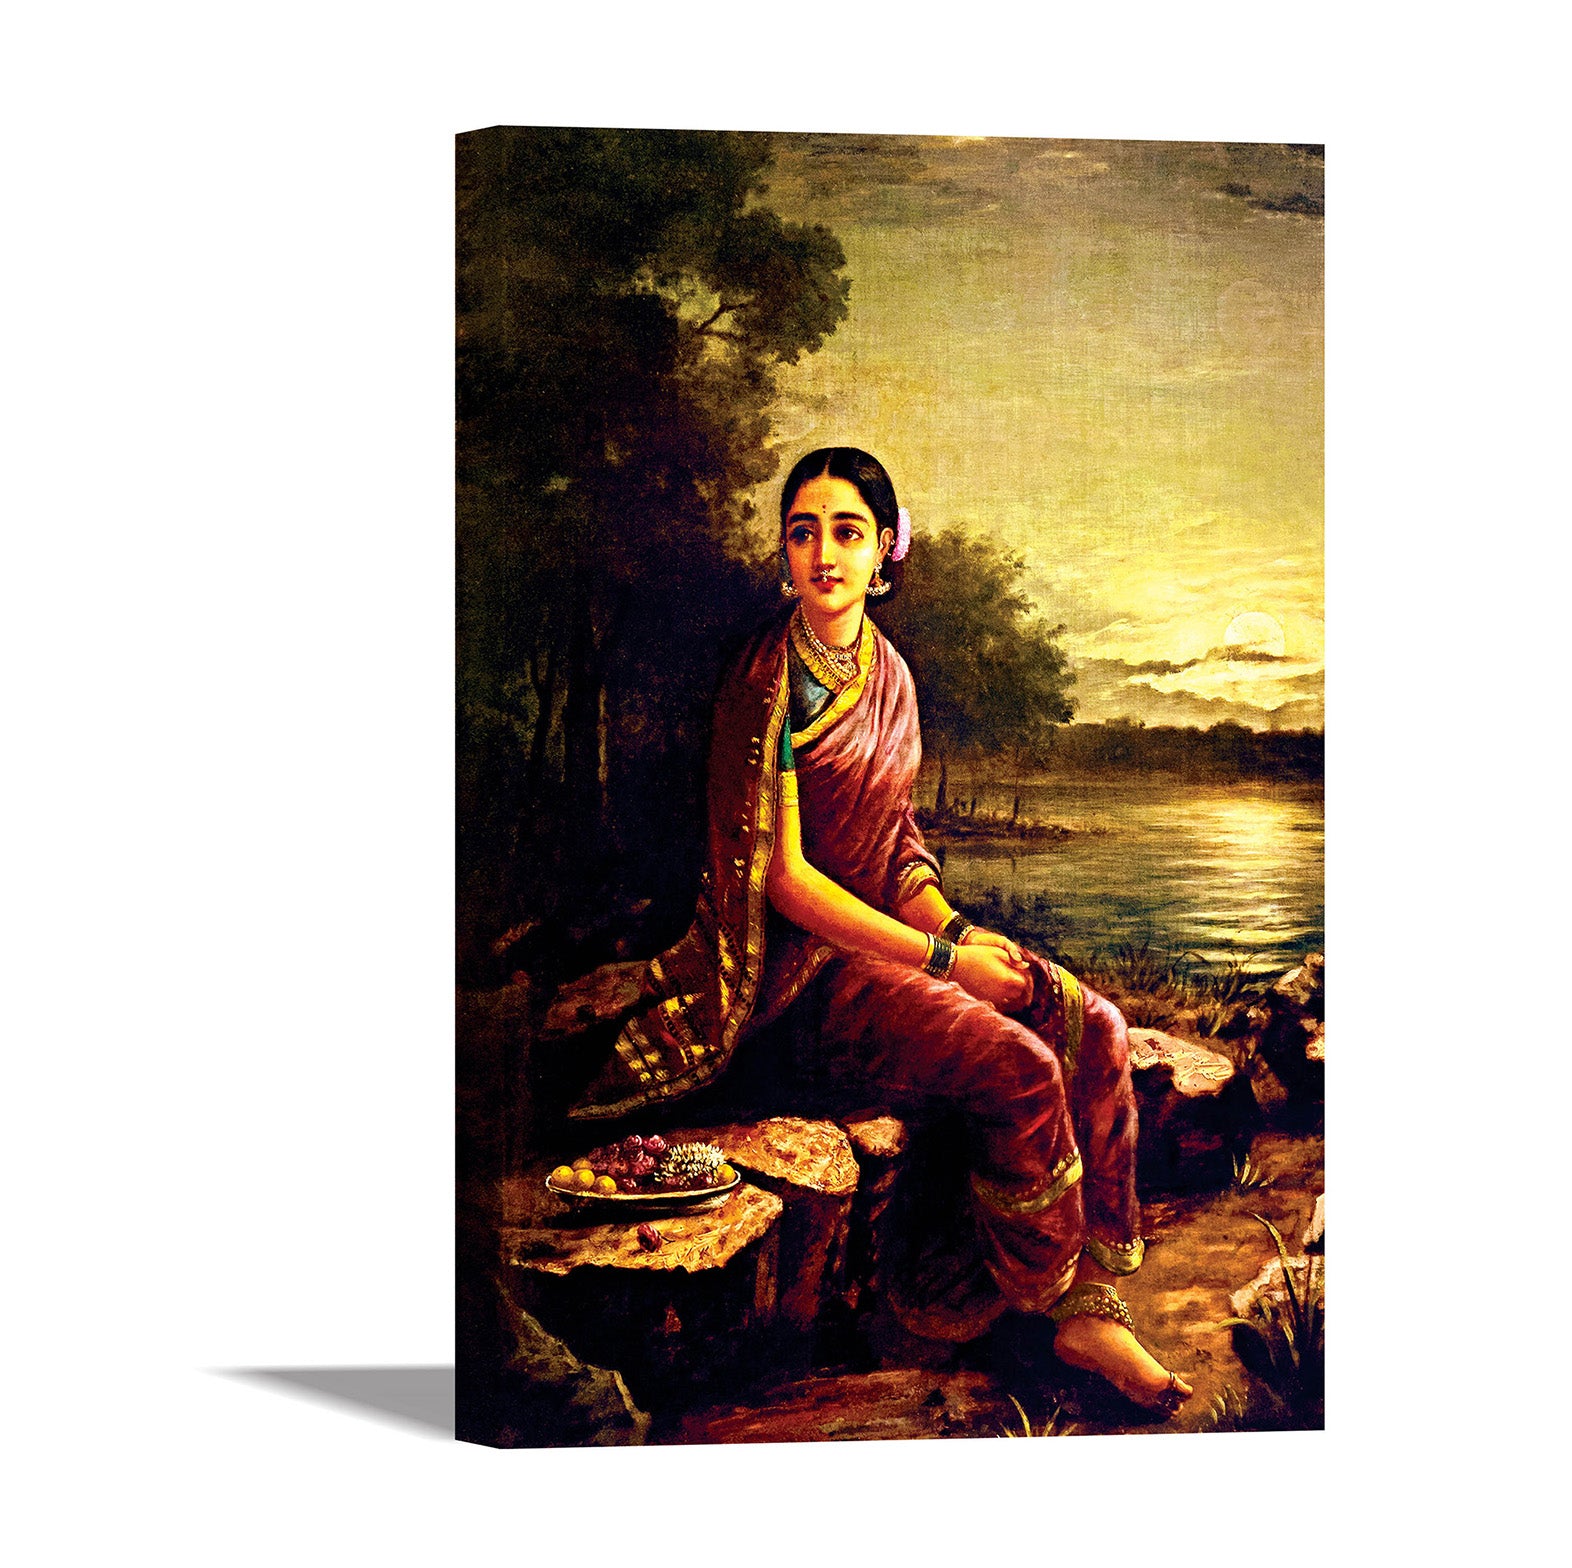 Radha In The Moonlight - Canvas Painting - Framed